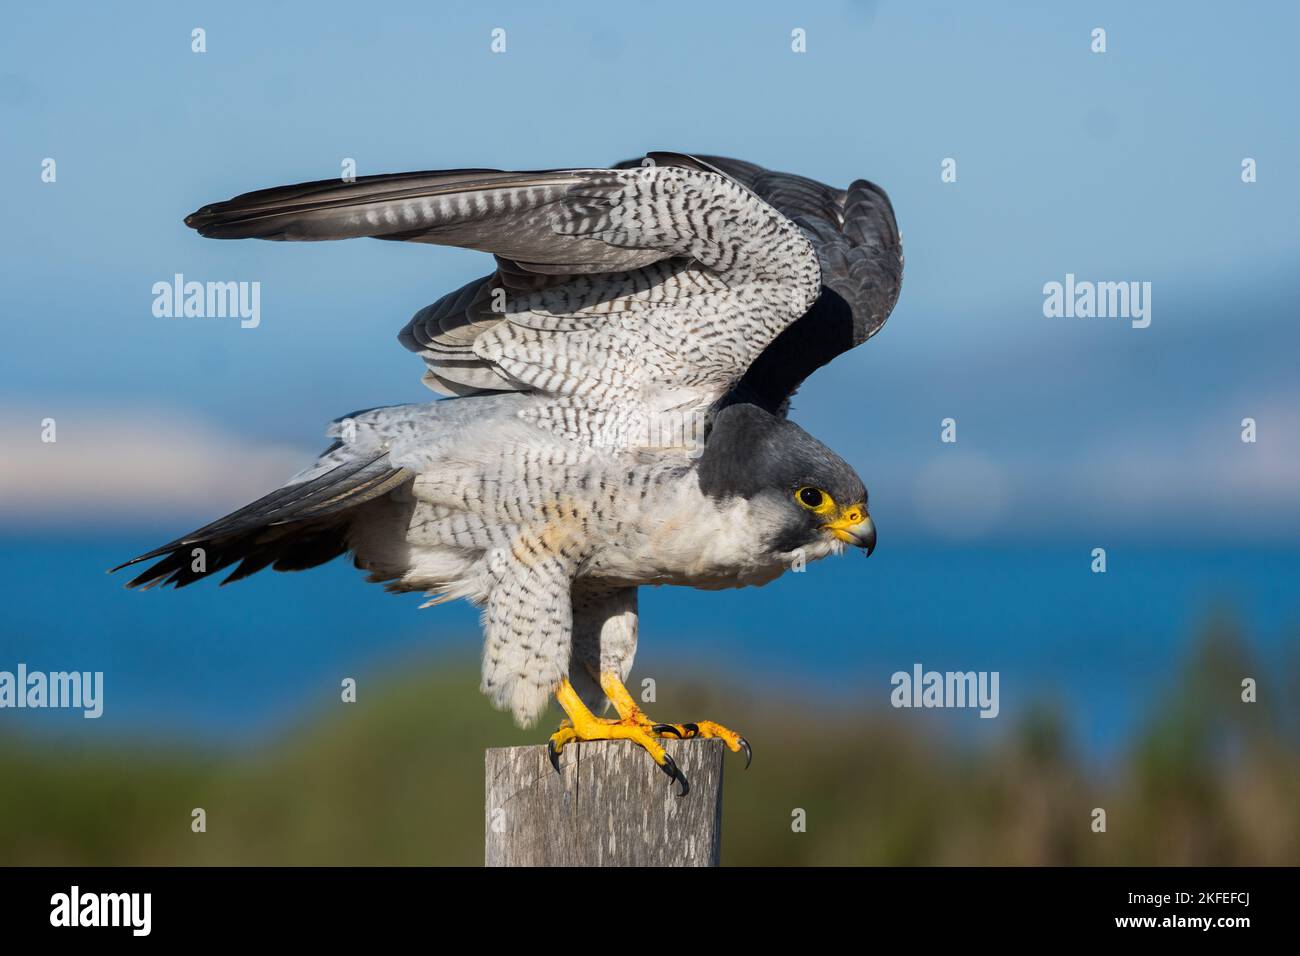 A closeup of a perched Shaheen falcon, Falco peregrinus peregrinator opening its arms to fly Stock Photo